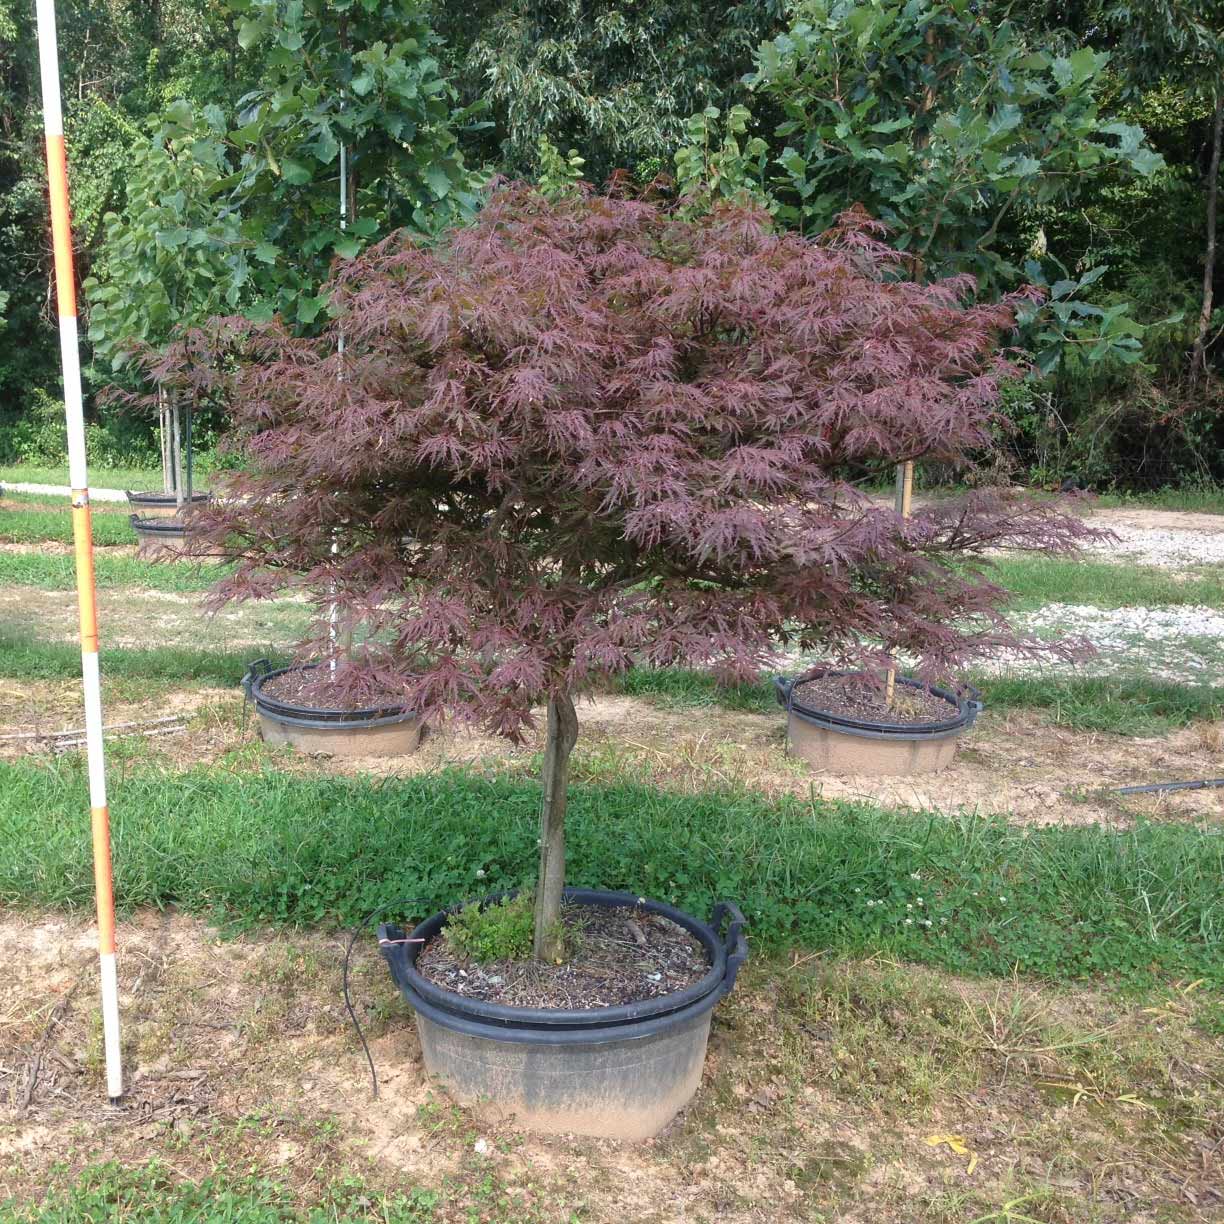 Acer Palmatum Dissectum 'Red Dragon' (Red Dragon Japanese Maple)